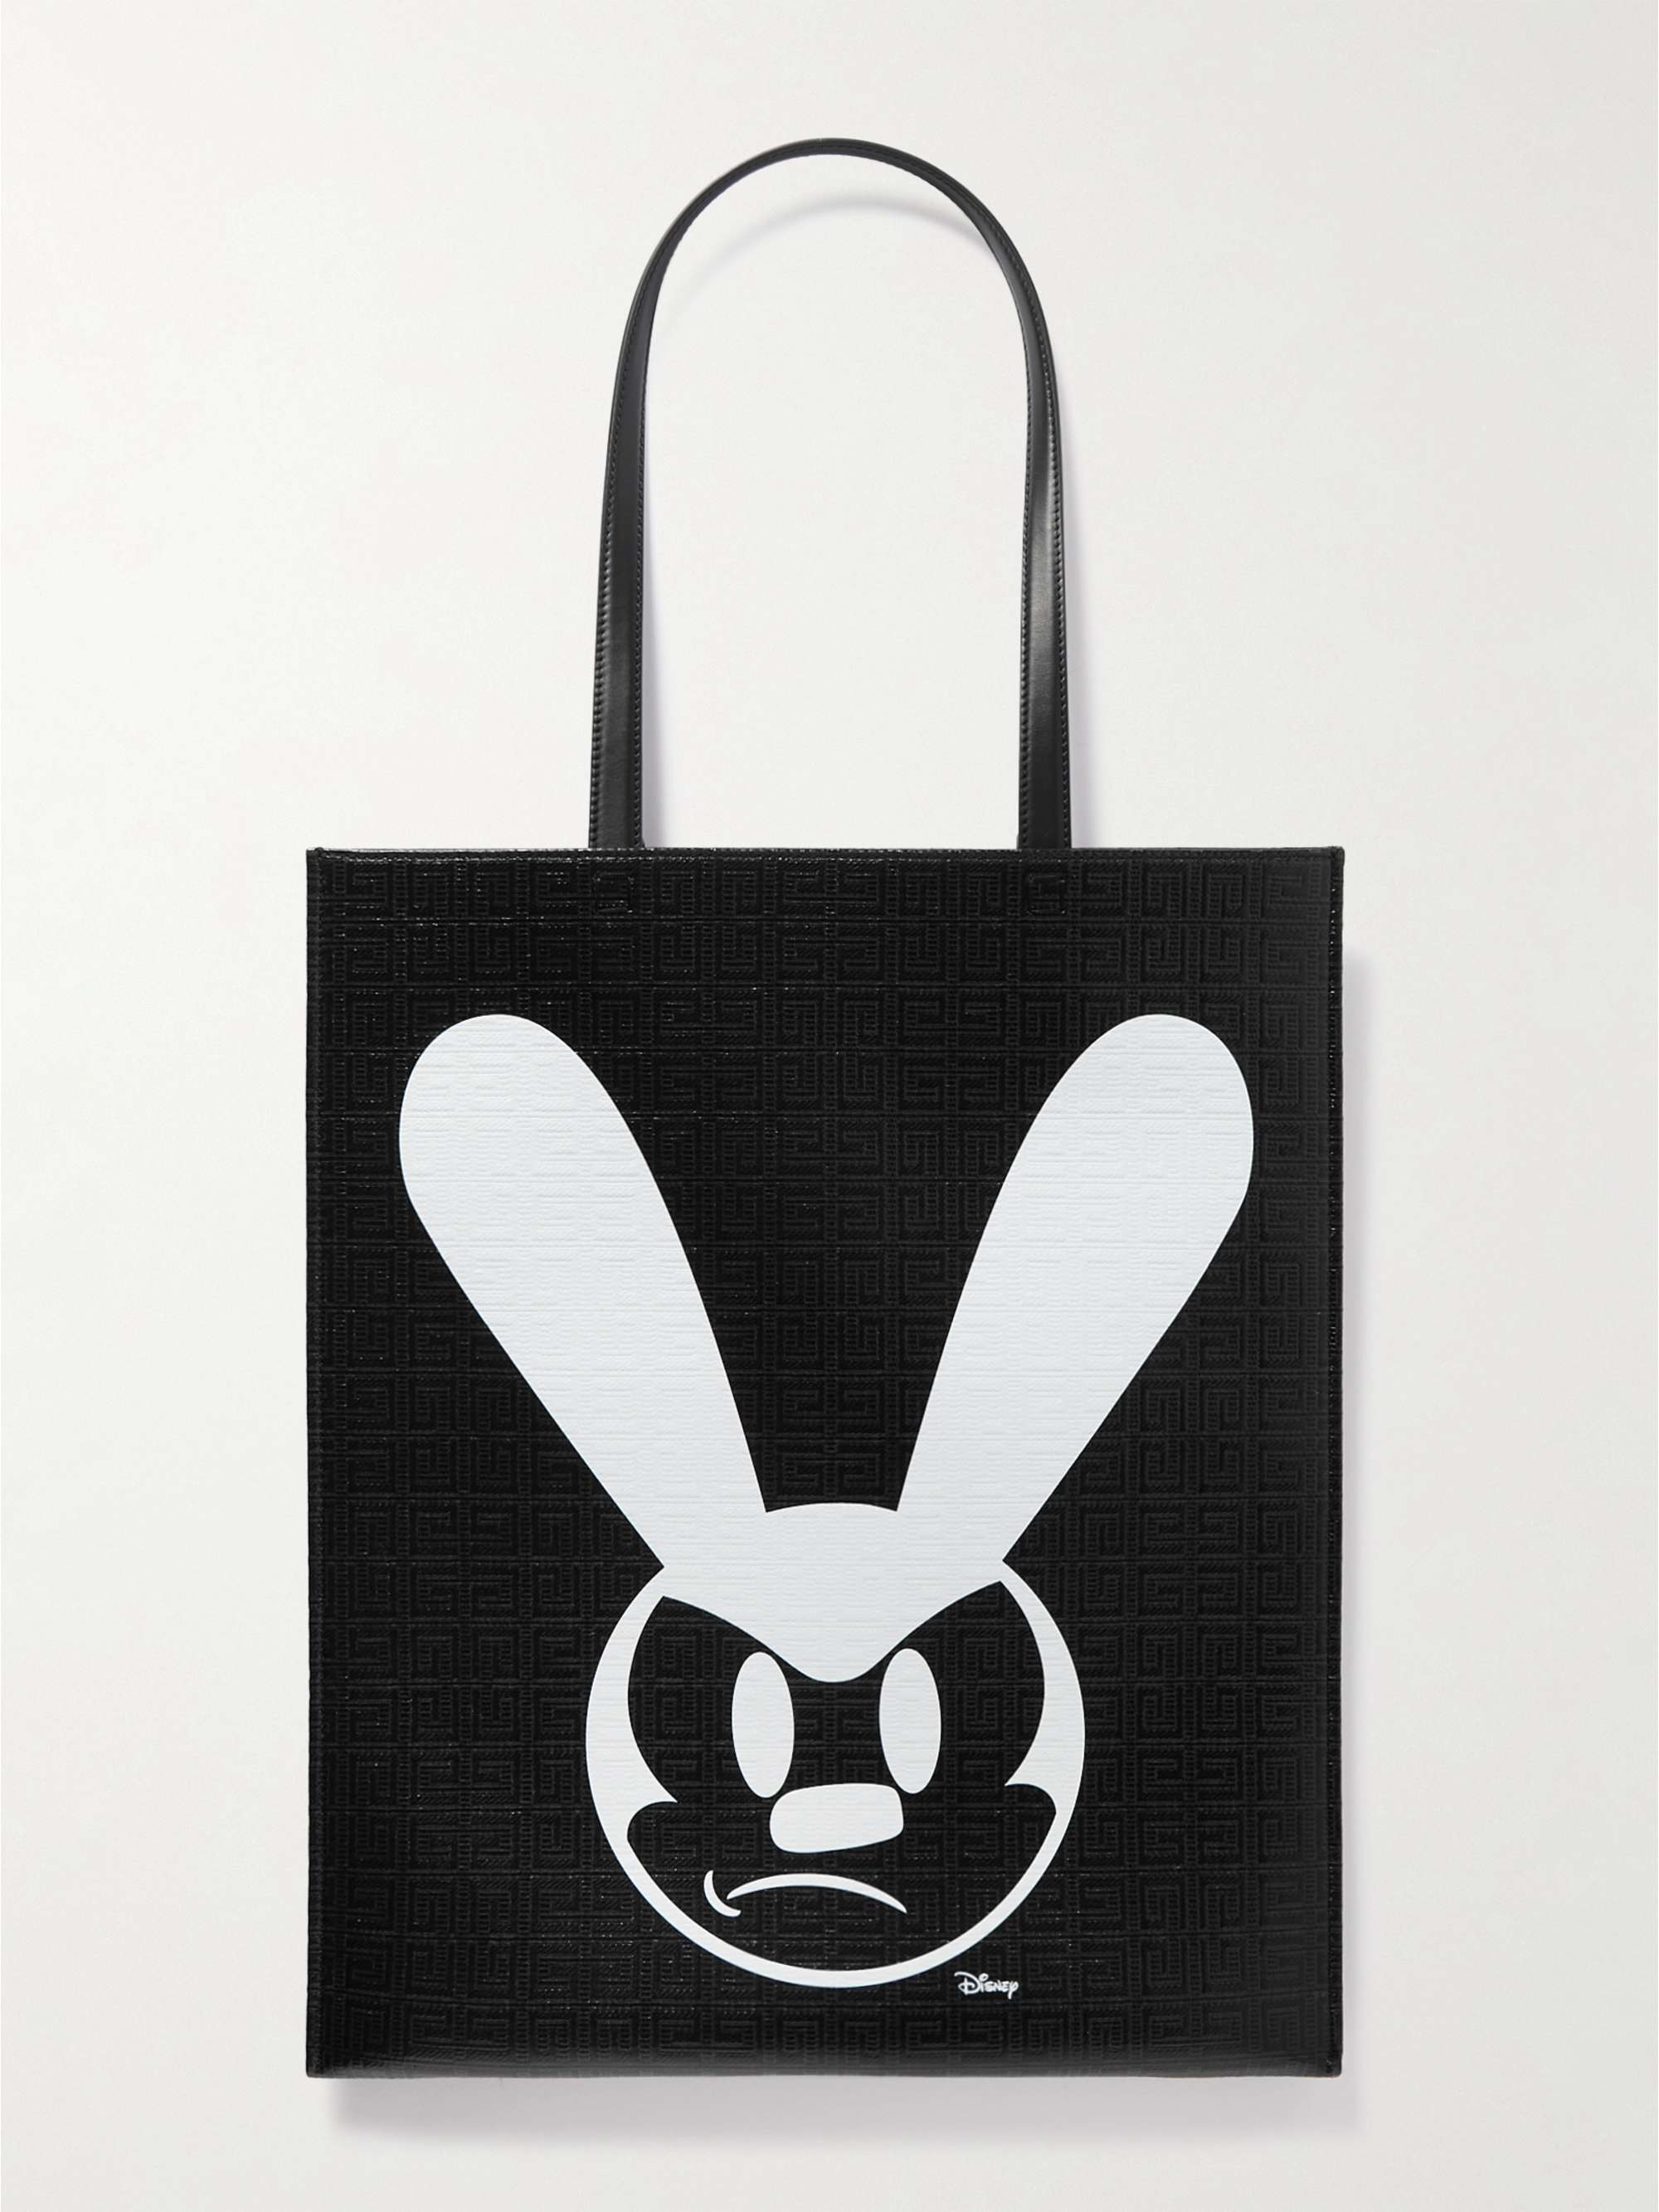 GIVENCHY + Disney Logo-Print Leather-Trimmed Coated-Canvas Tote Bag